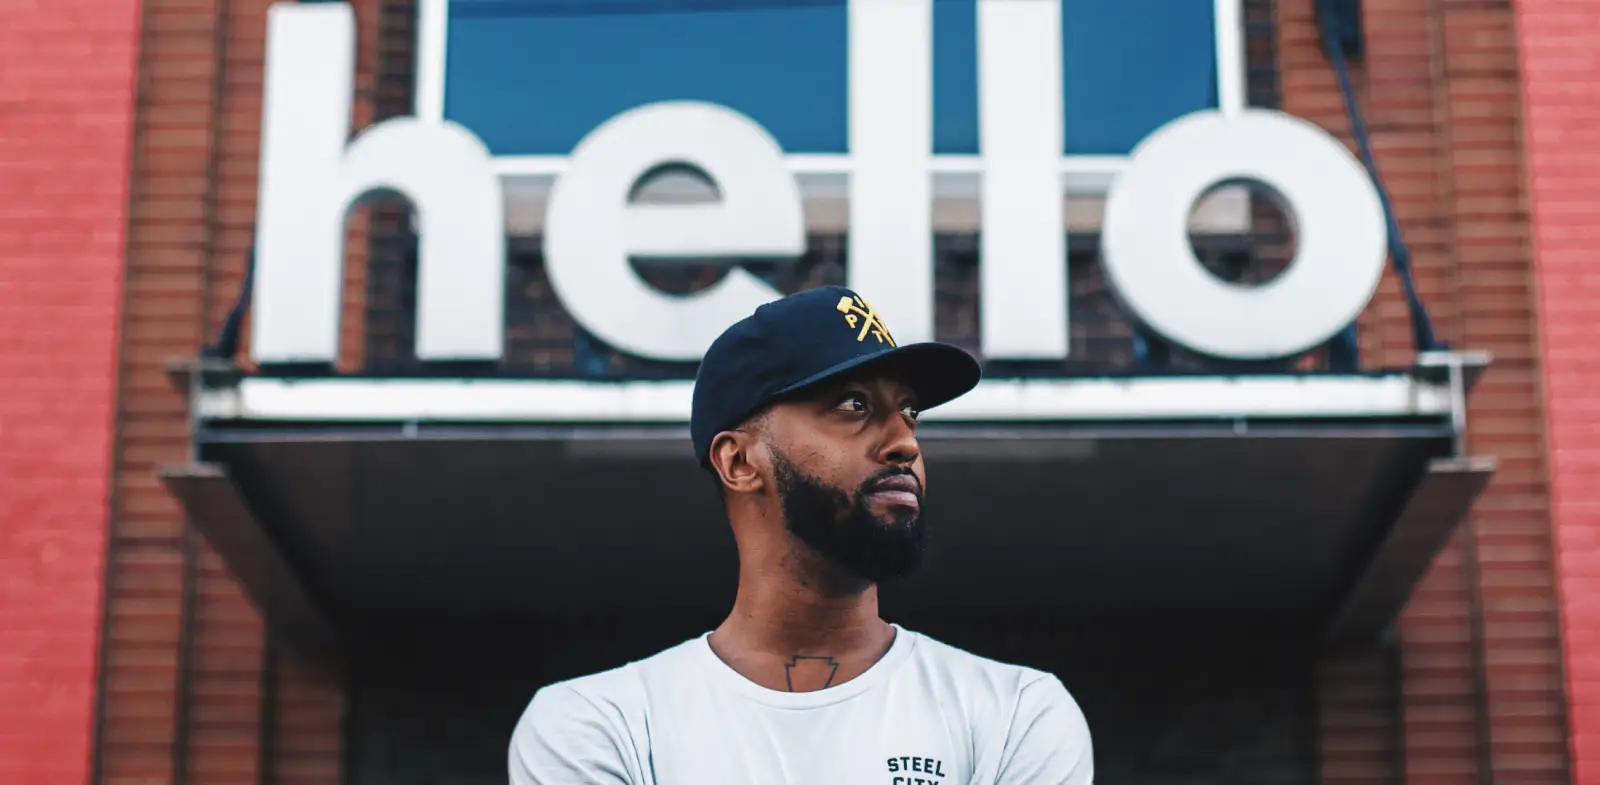 black man standing in front of hello sign